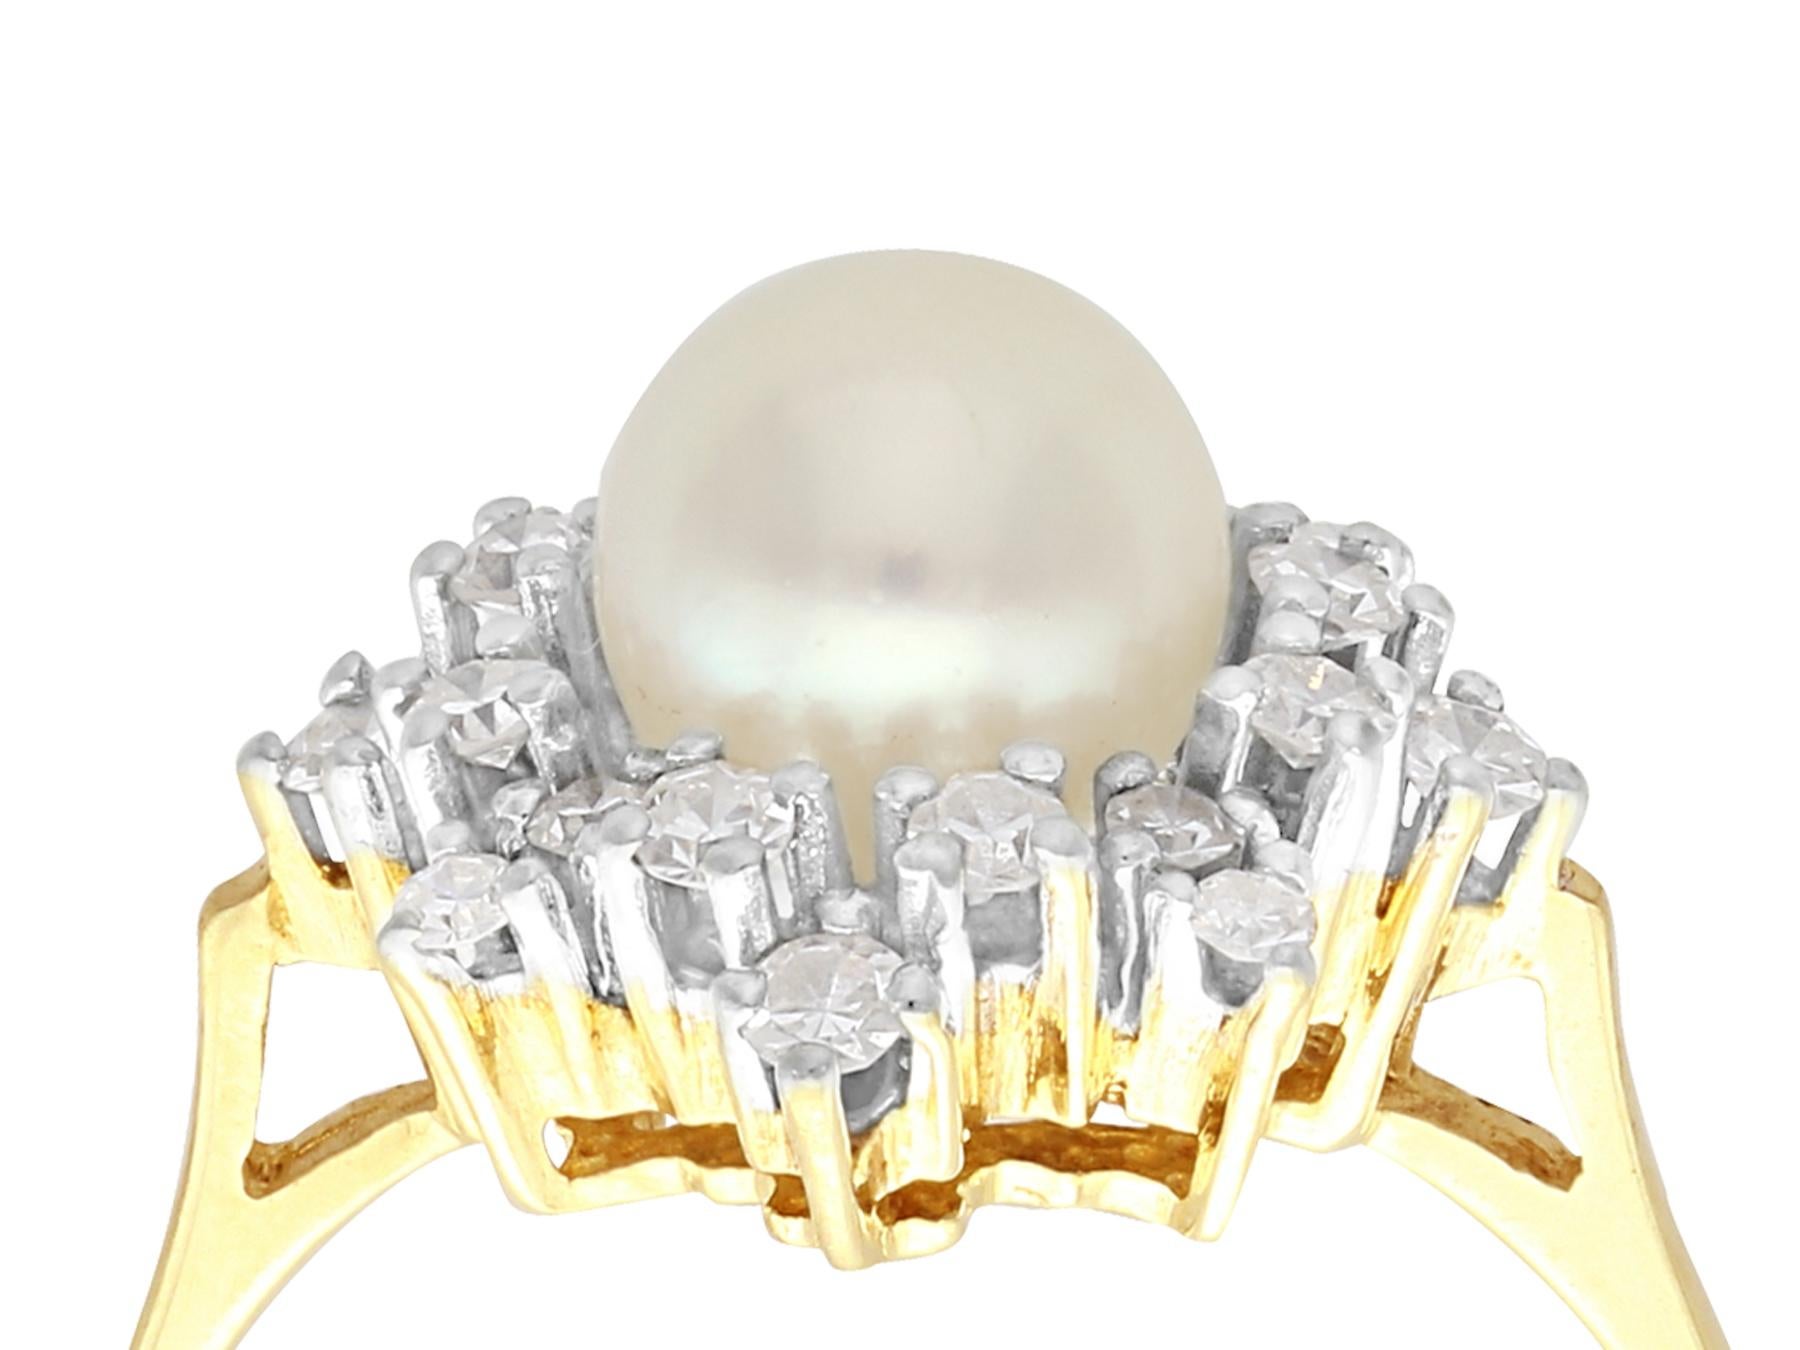 An impressive cultured pearl and 0.60 carat diamond, 18 karat yellow gold and 18 karat white gold set cluster ring; part of our diverse vintage jewelry collections

This fine and impressive pearl and diamond ring has been crafted in 18k yellow gold